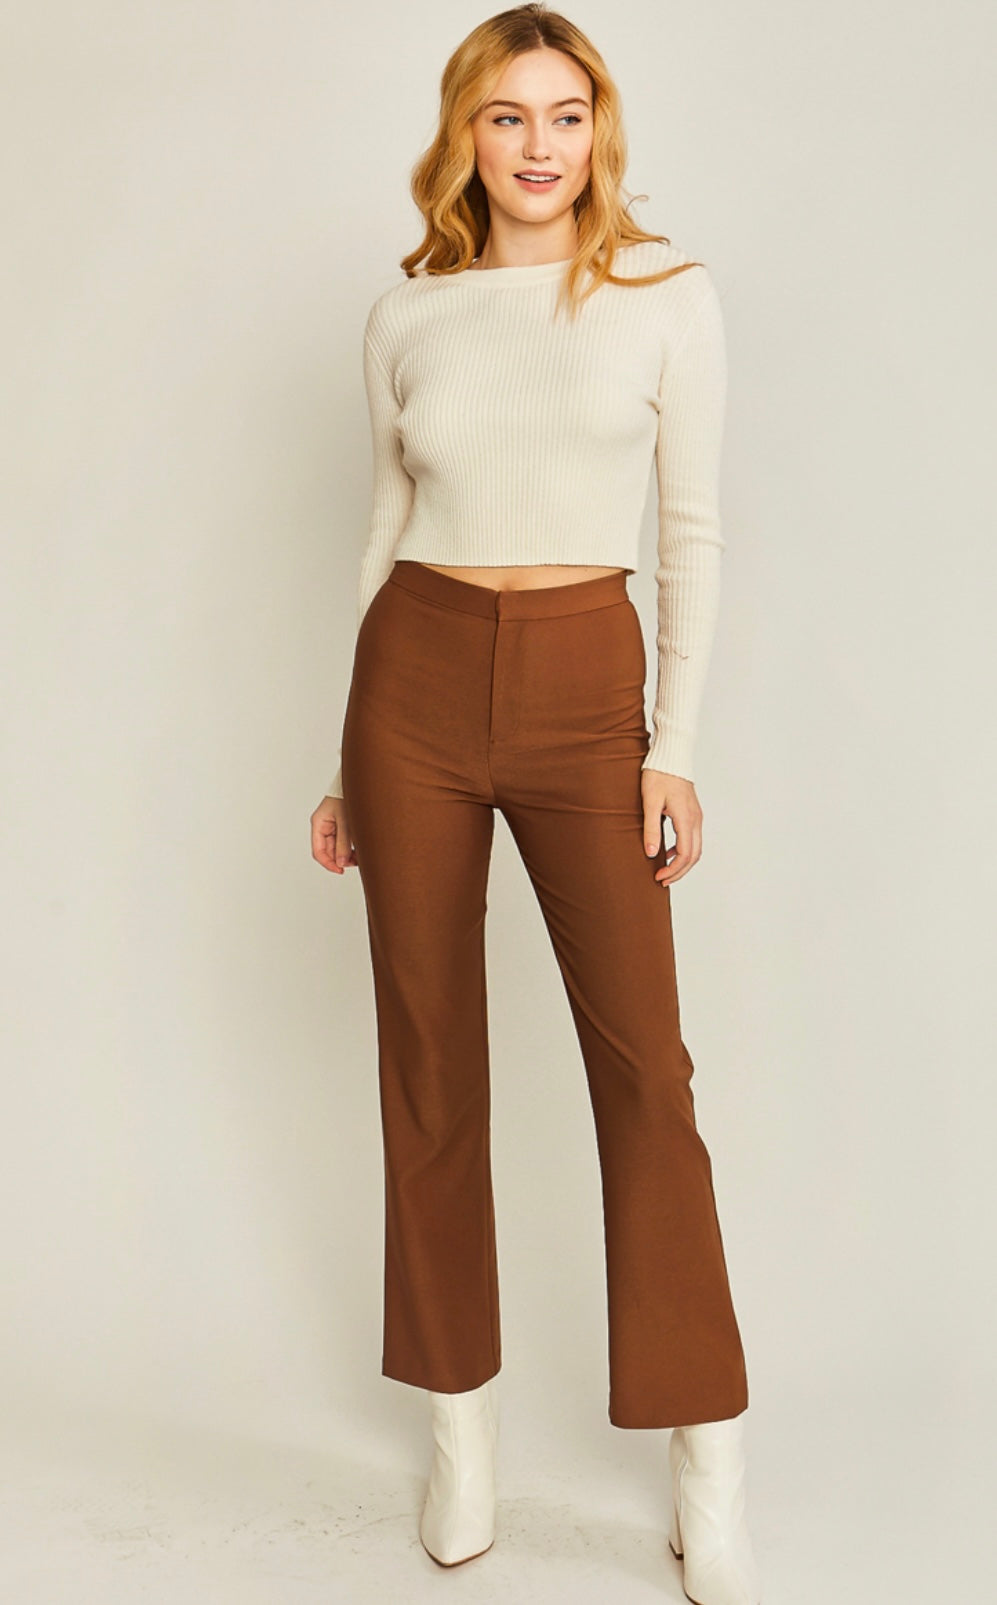 Woven solid long flared career pants